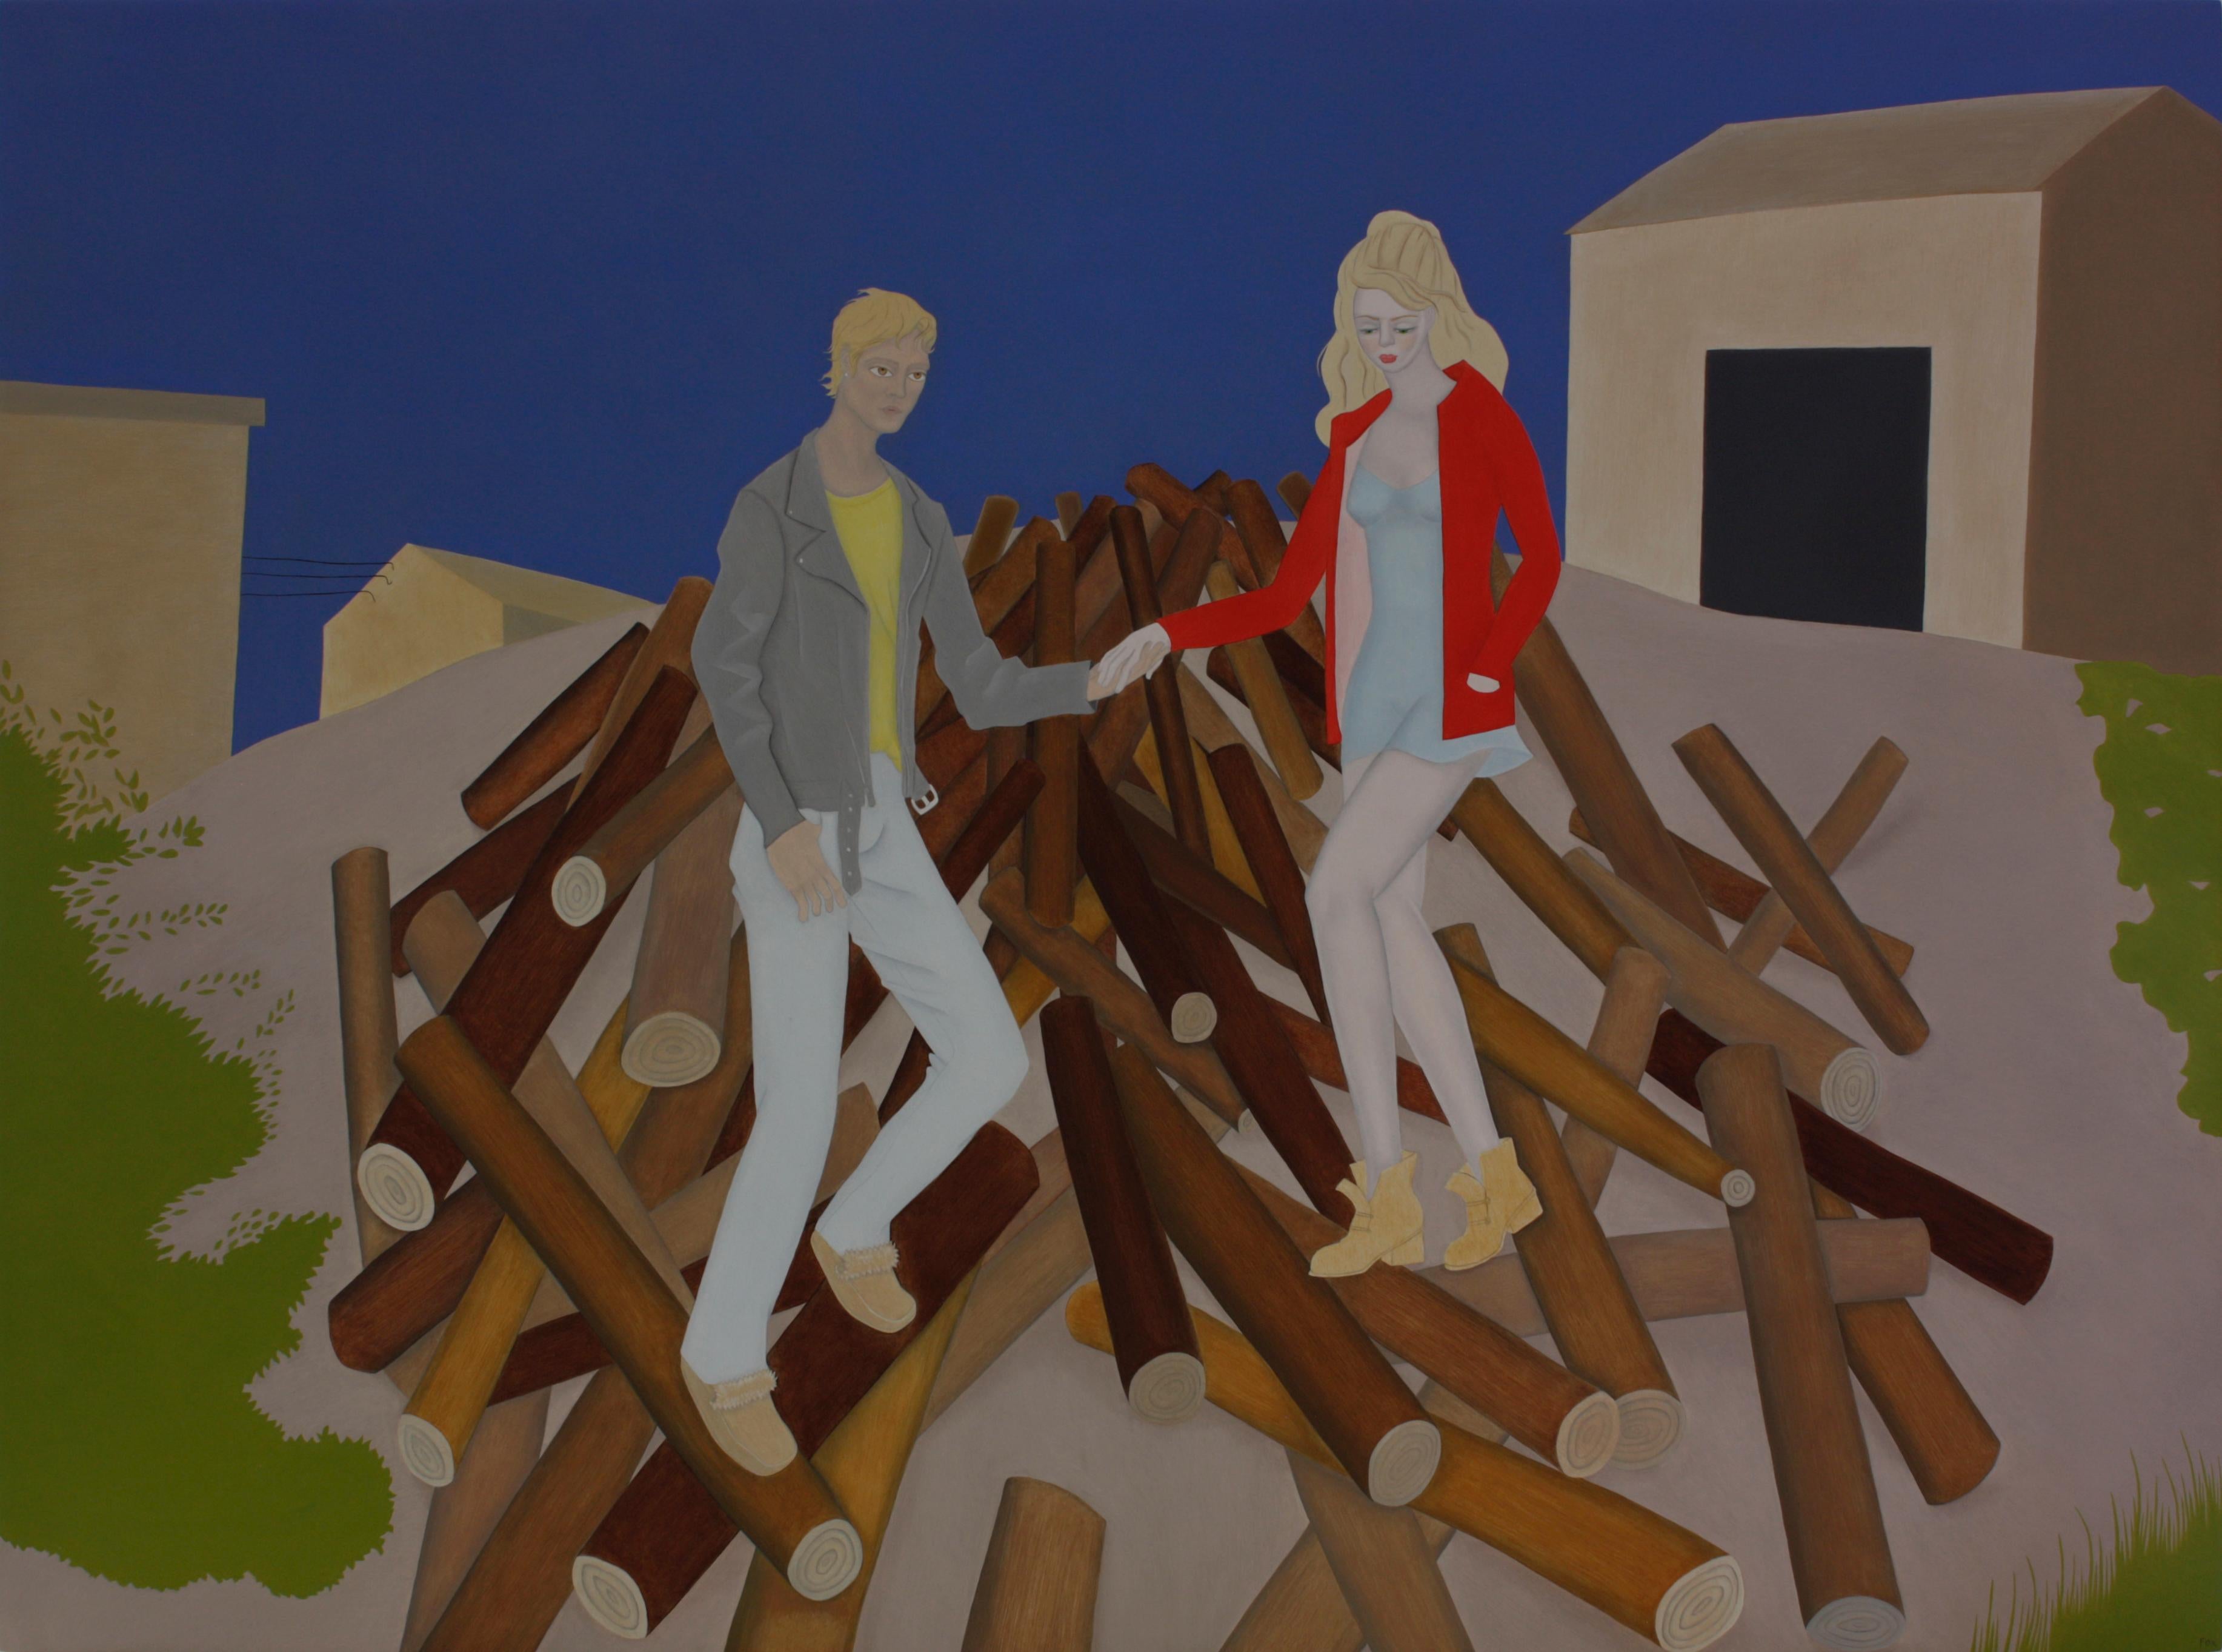 Elizabeth Fox Figurative Painting - Sneaking Out the Wood Pile